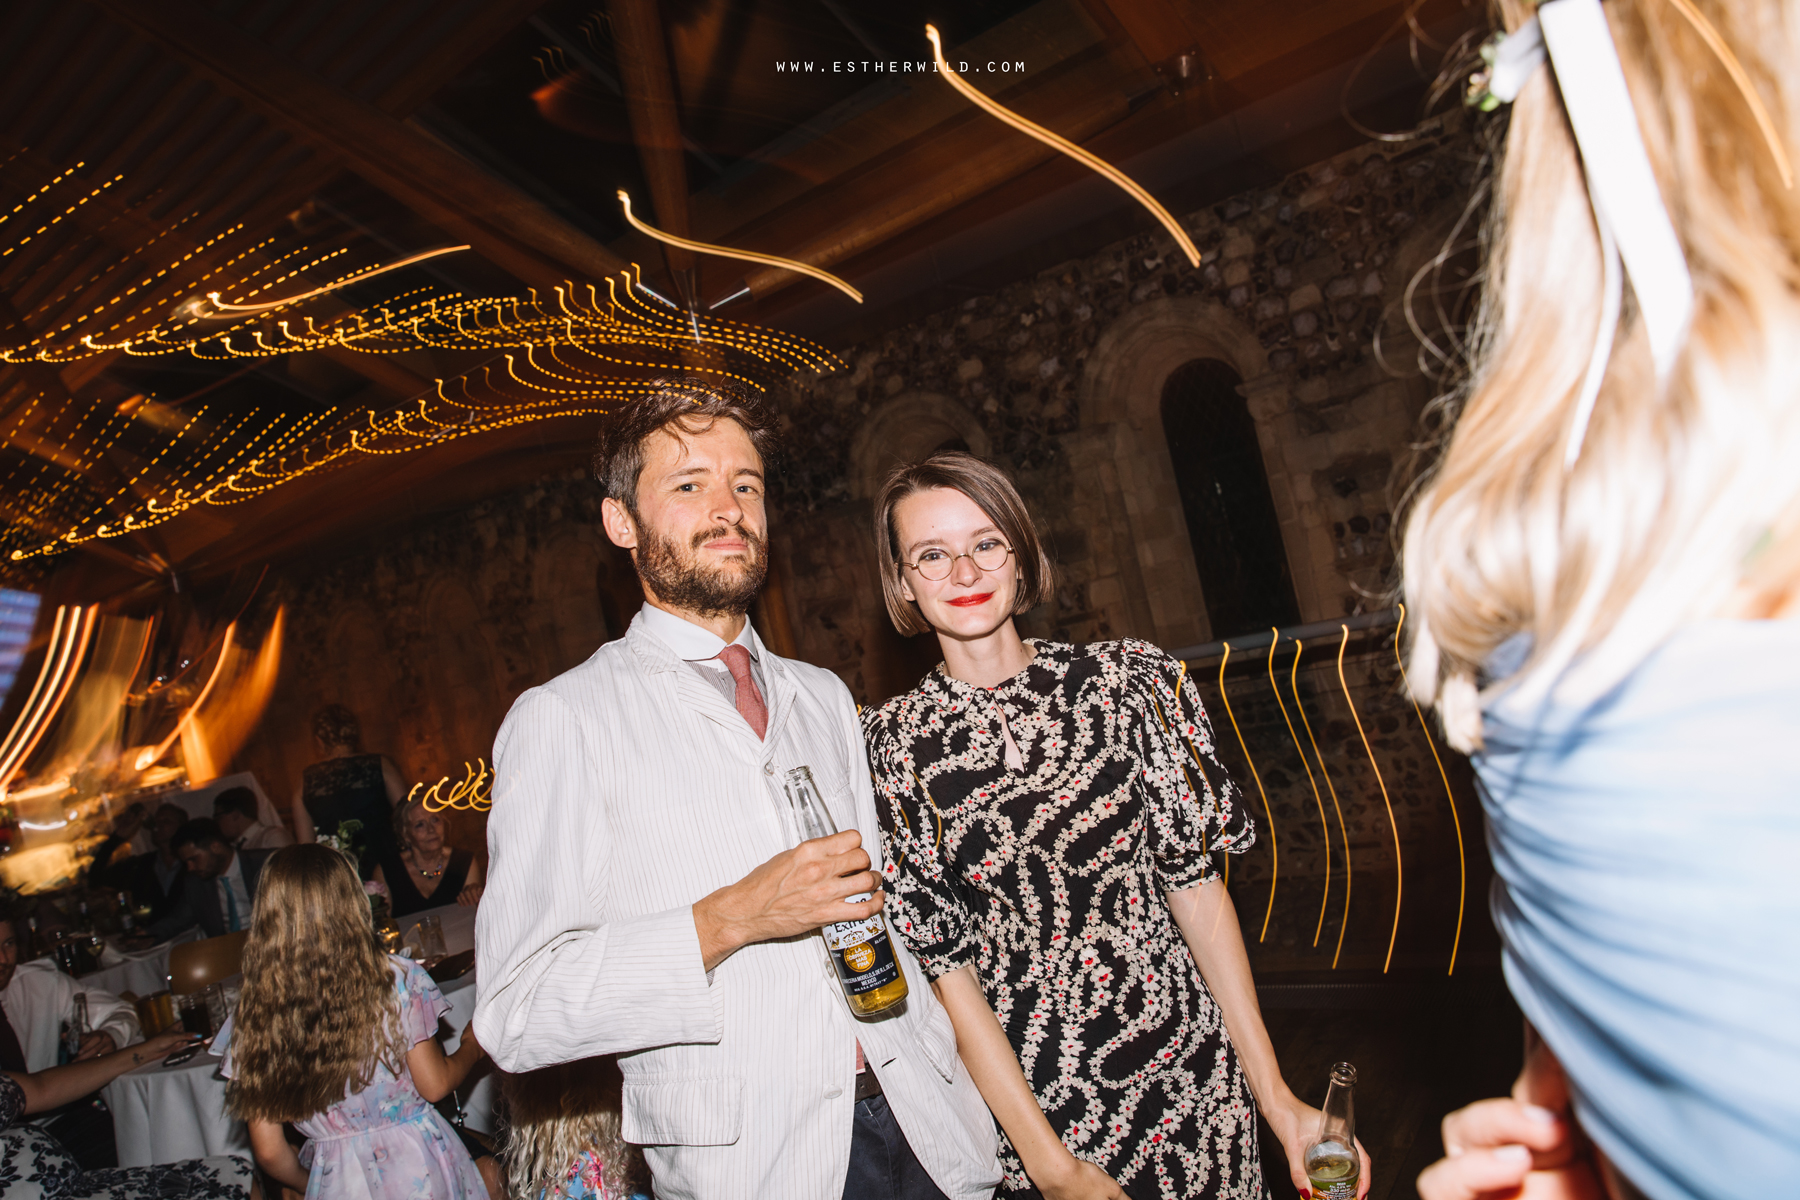 Norwich_Castle_Arcade_Grosvenor_Chip_Birdcage_Cathedral_Cloisters_Refectory_Wedding_Photography_Esther_Wild_Photographer_Norfolk_Kings_Lynn_3R8A3447.jpg